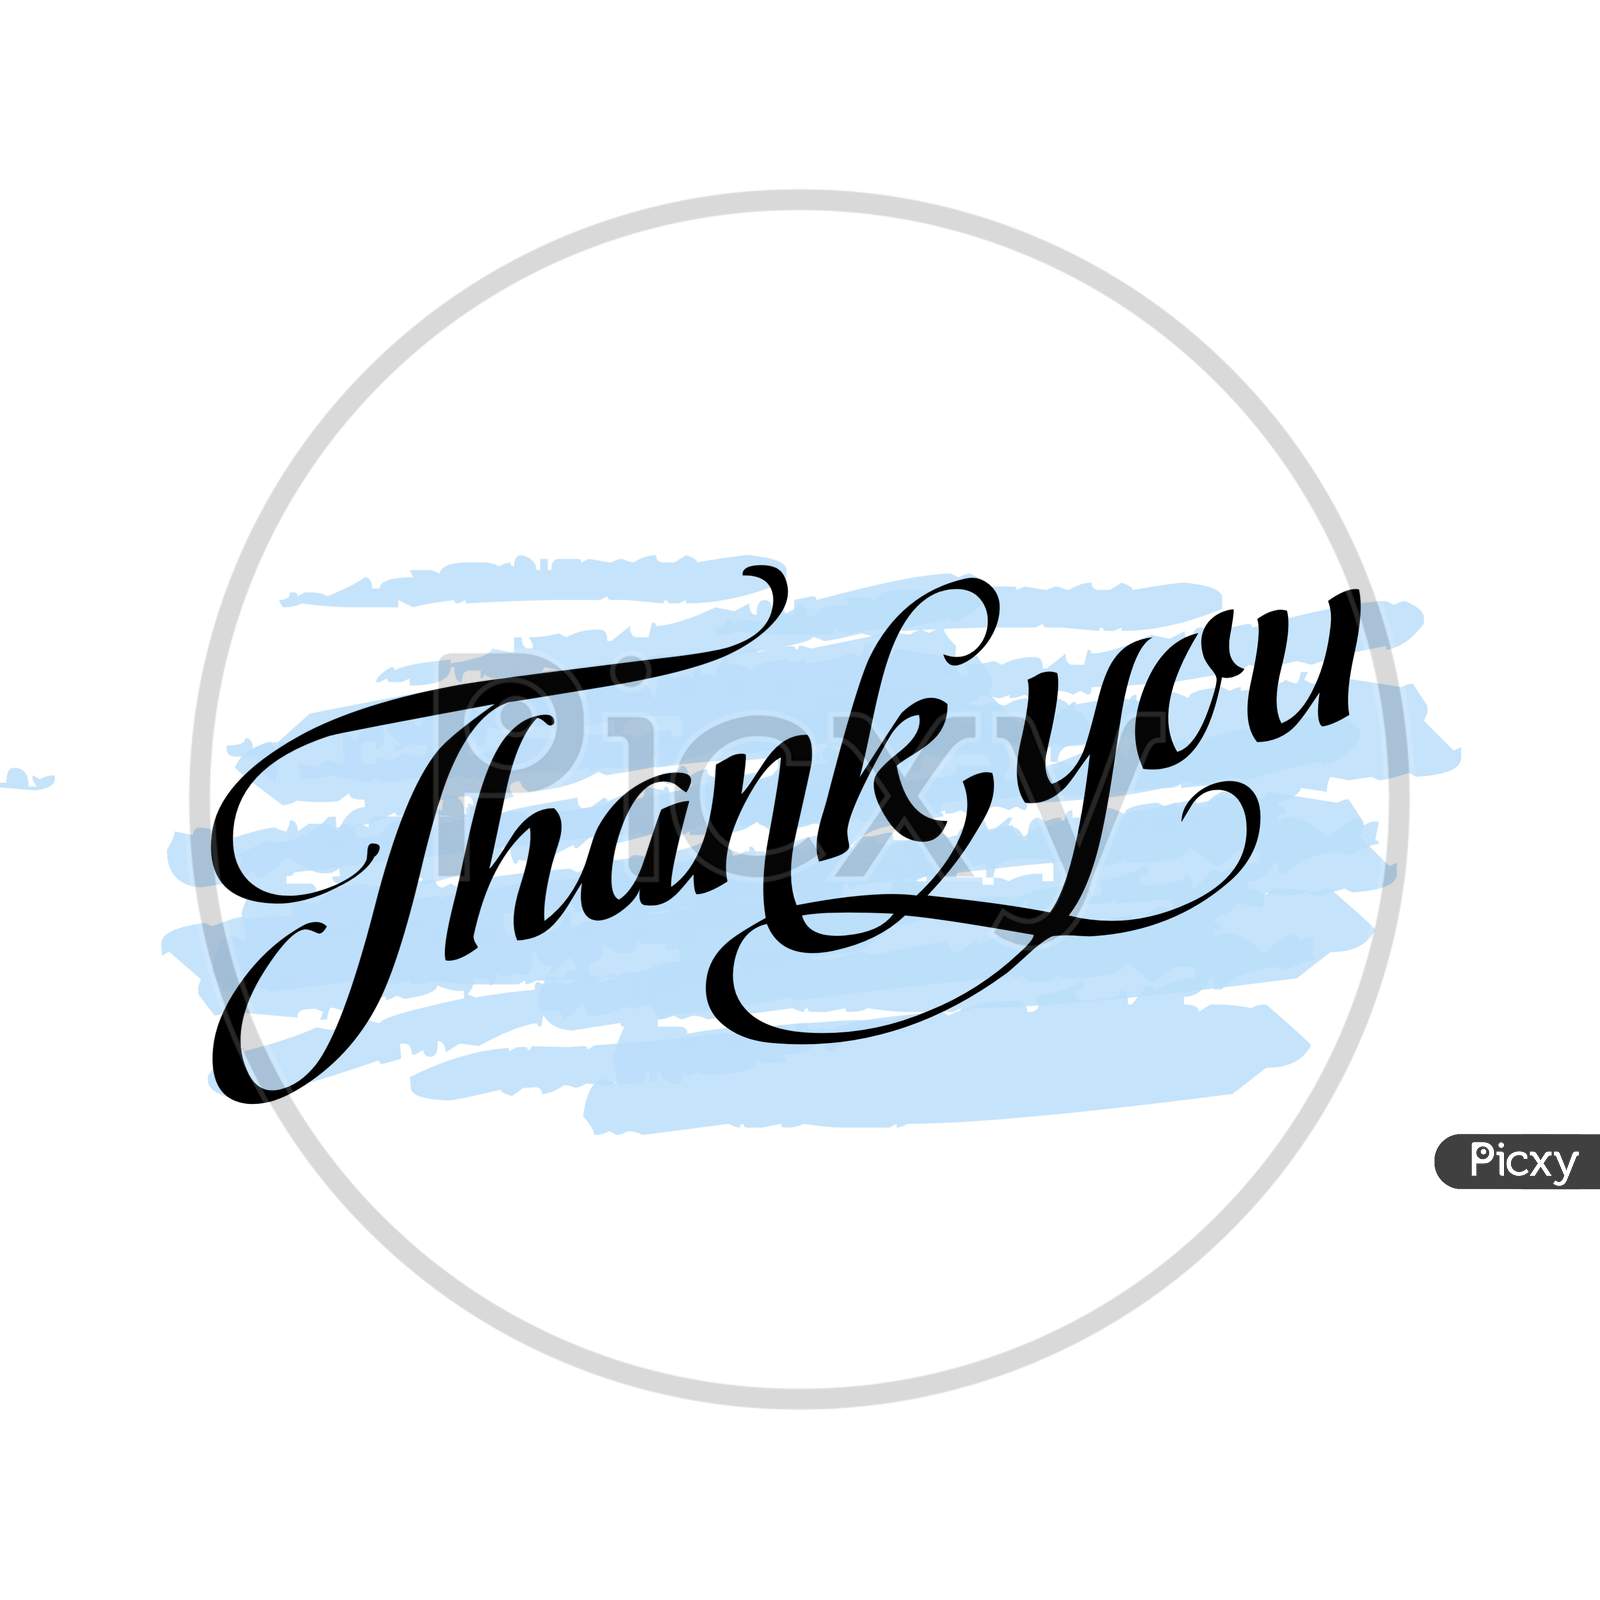 Thank You (white and blue background with black color fonts)